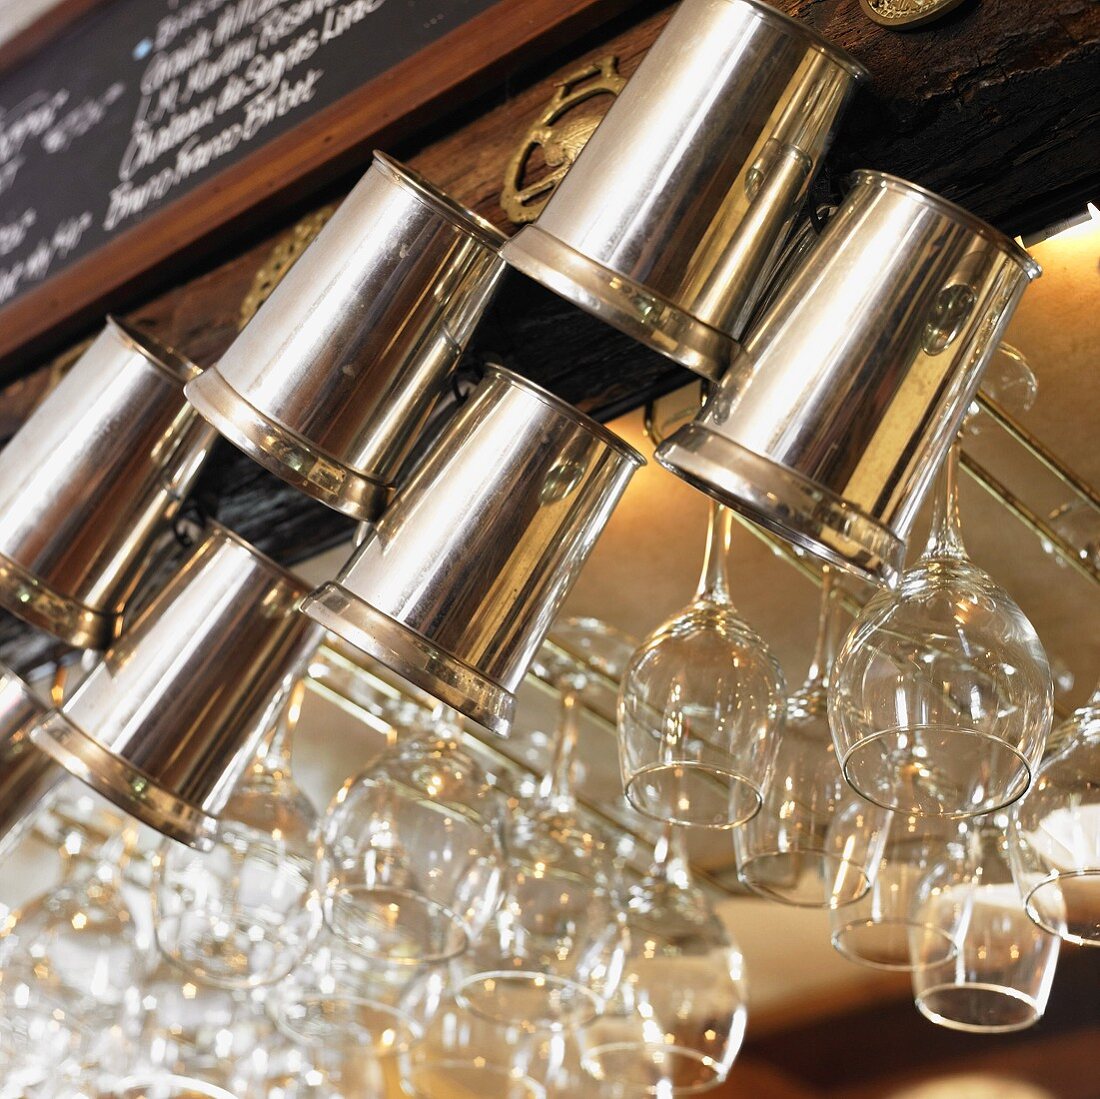 Metal Beer Mugs and Wine Glasses Hanging From a Bar